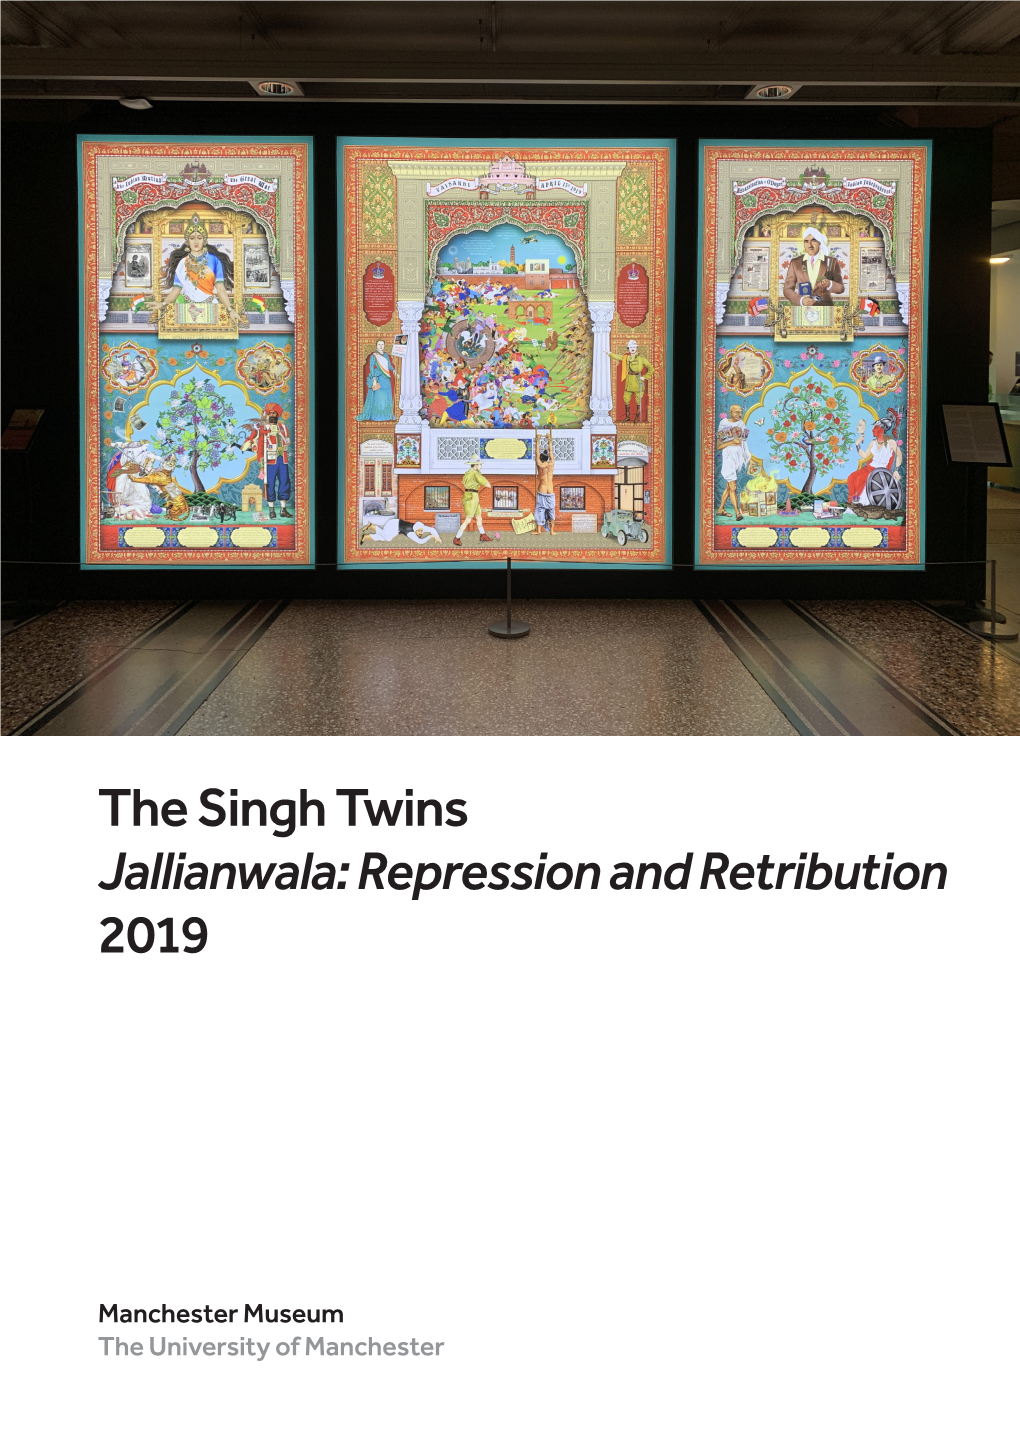 The Singh Twins Jallianwala: Repression and Retribution 2019